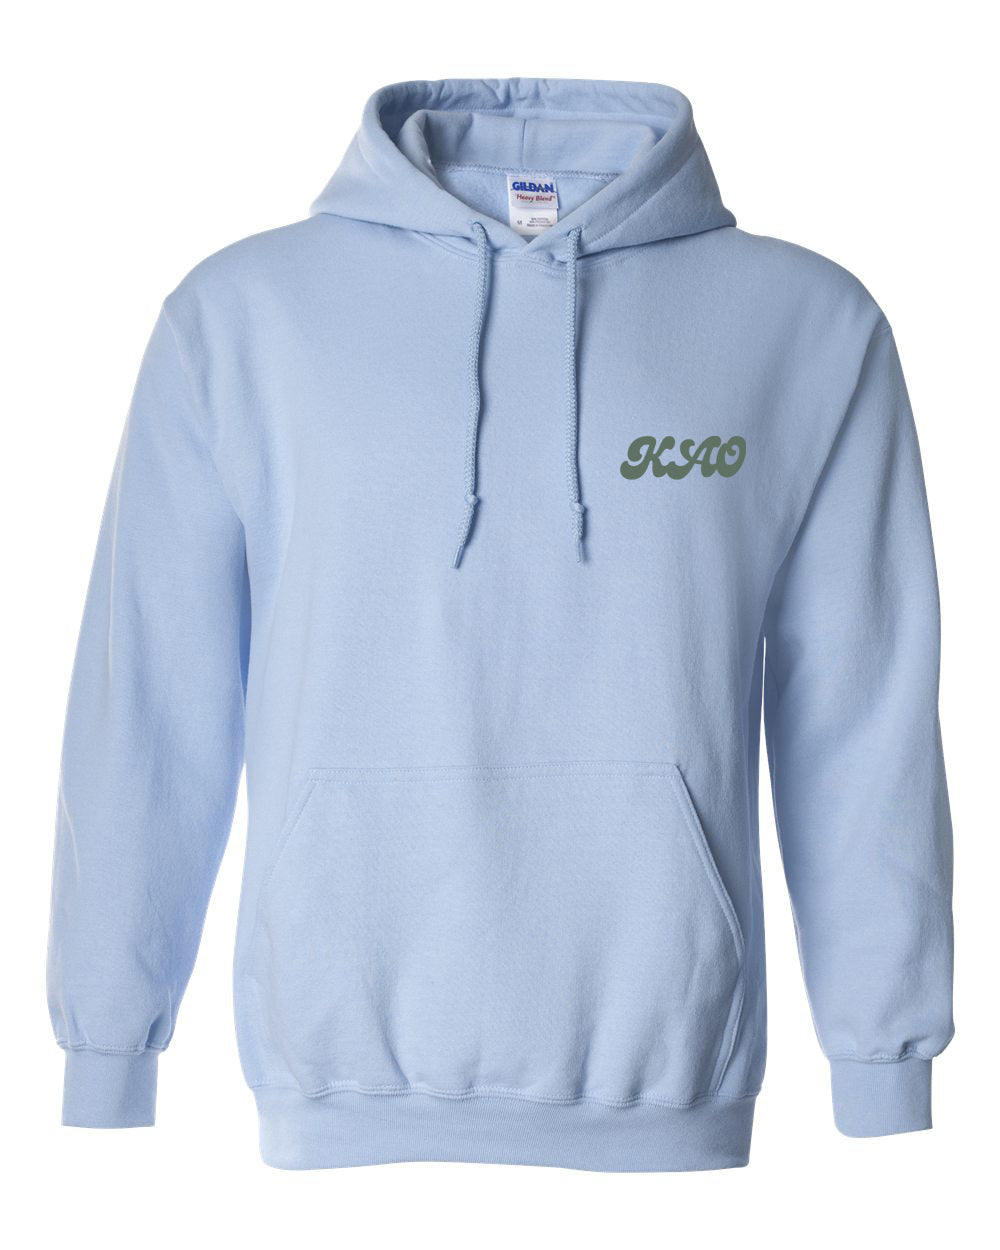 a light blue hoodie with a green logo